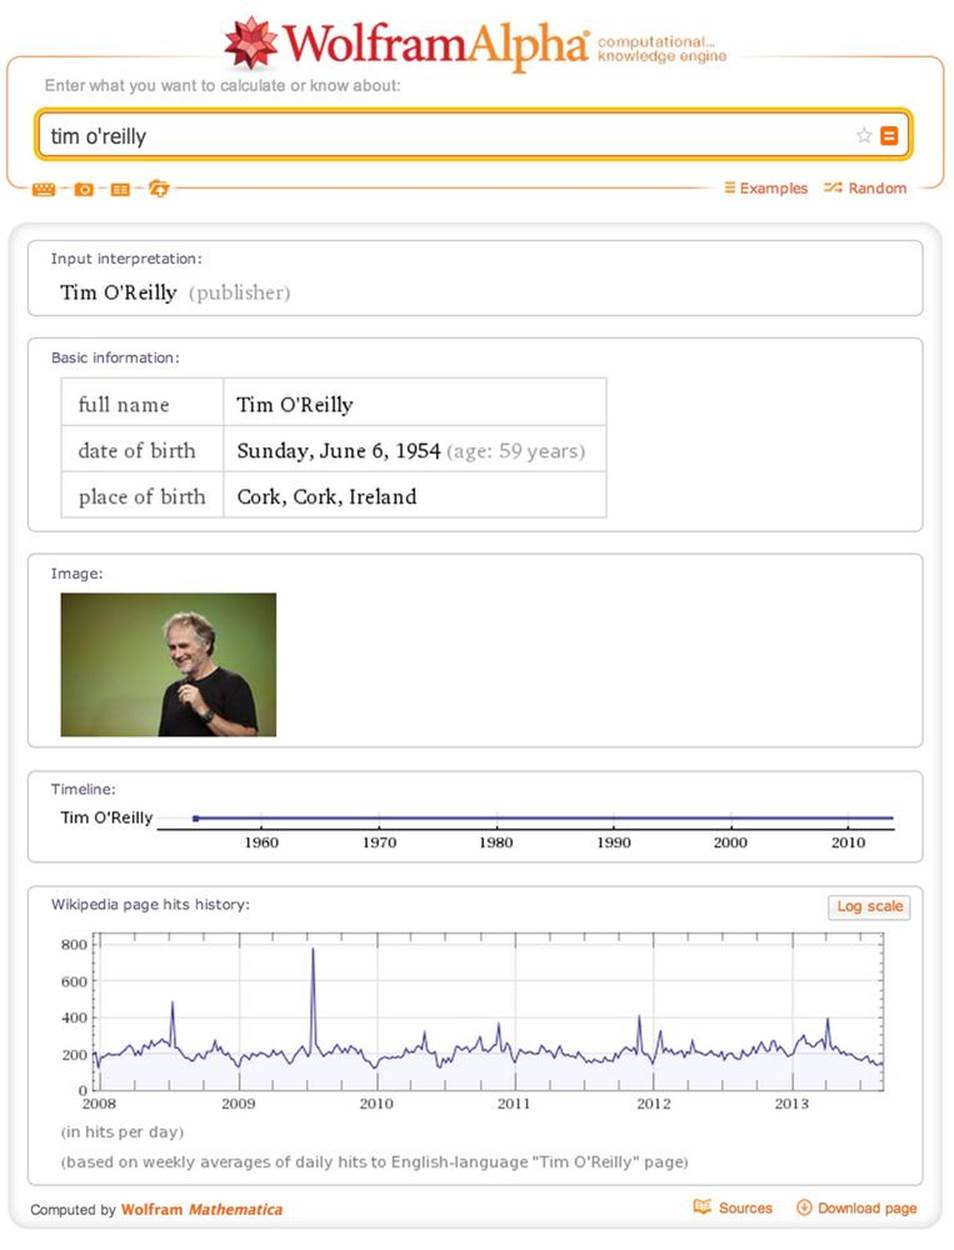 Sample results for a “tim o’reilly” query with WolframAlpha